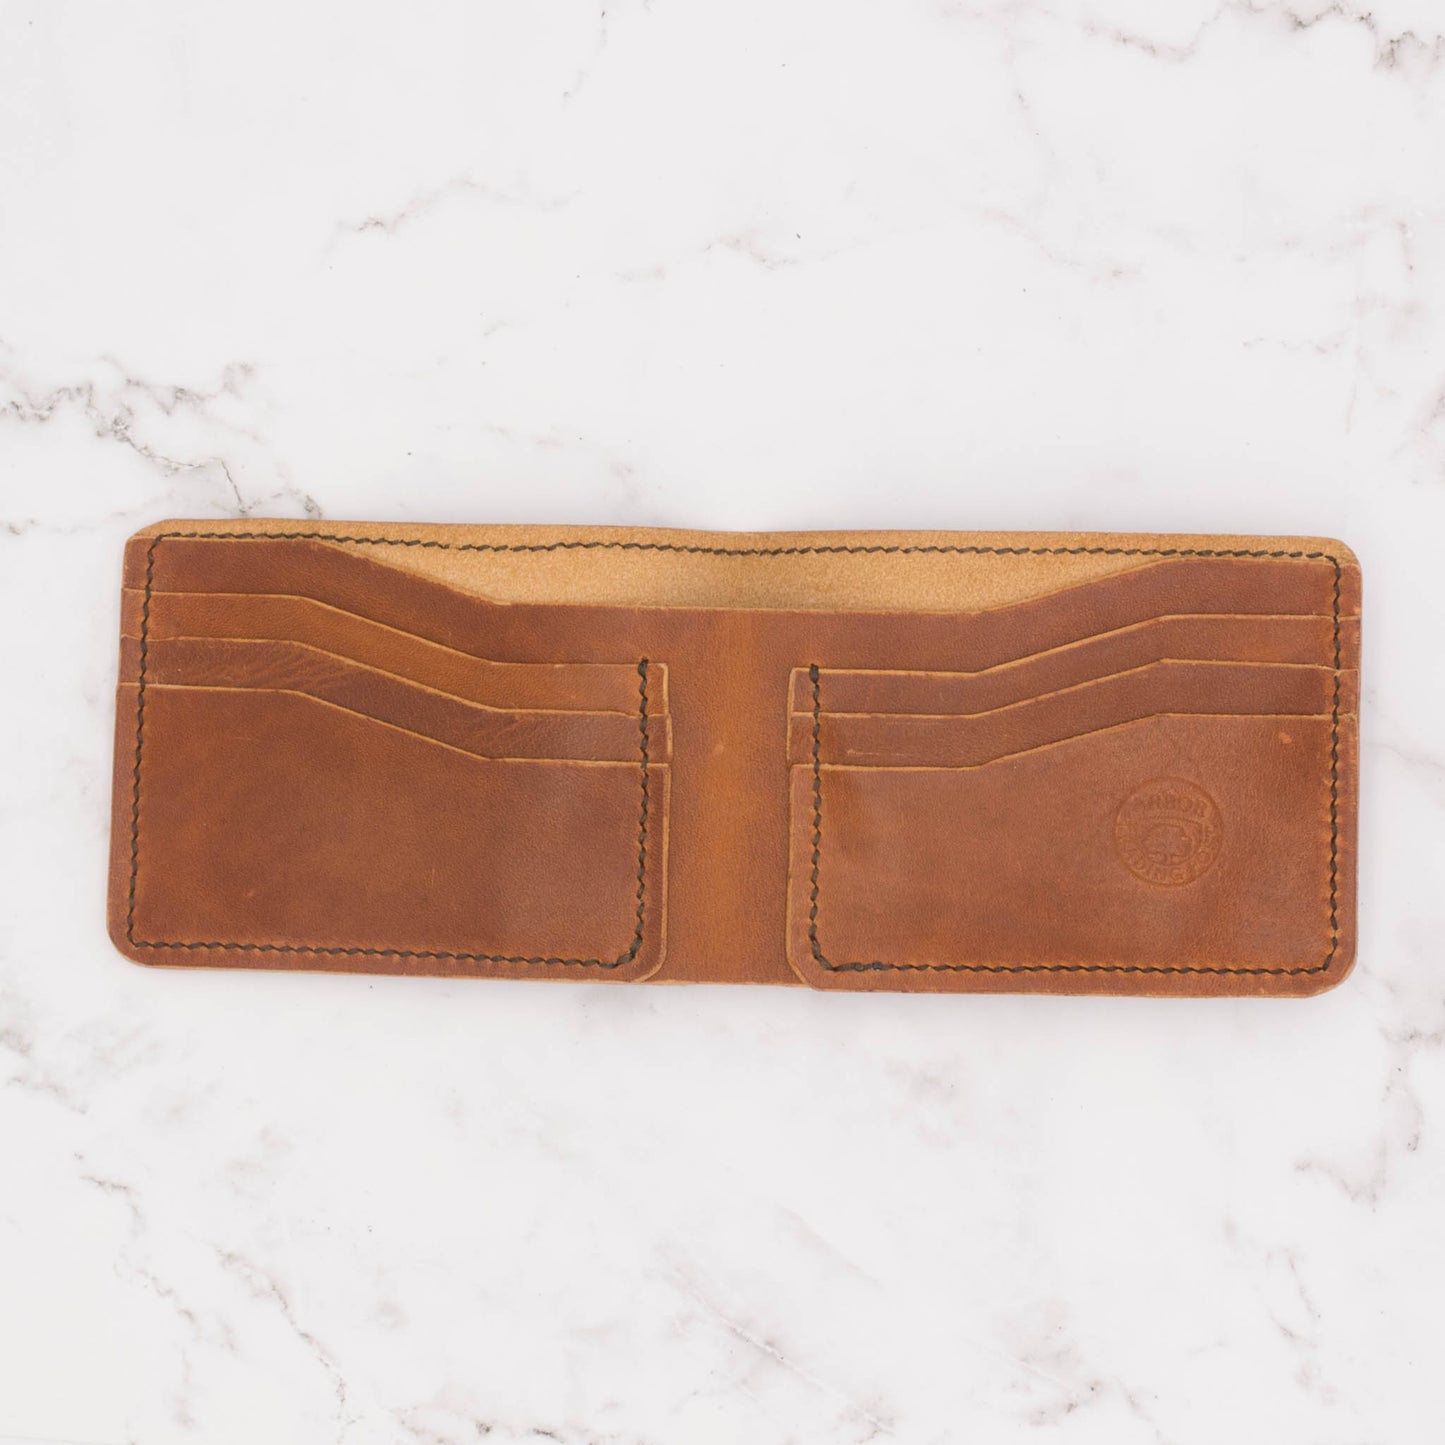 Handcrafted Leather Bifold Wallet, 6 Card Slots and Billfold - English Tan